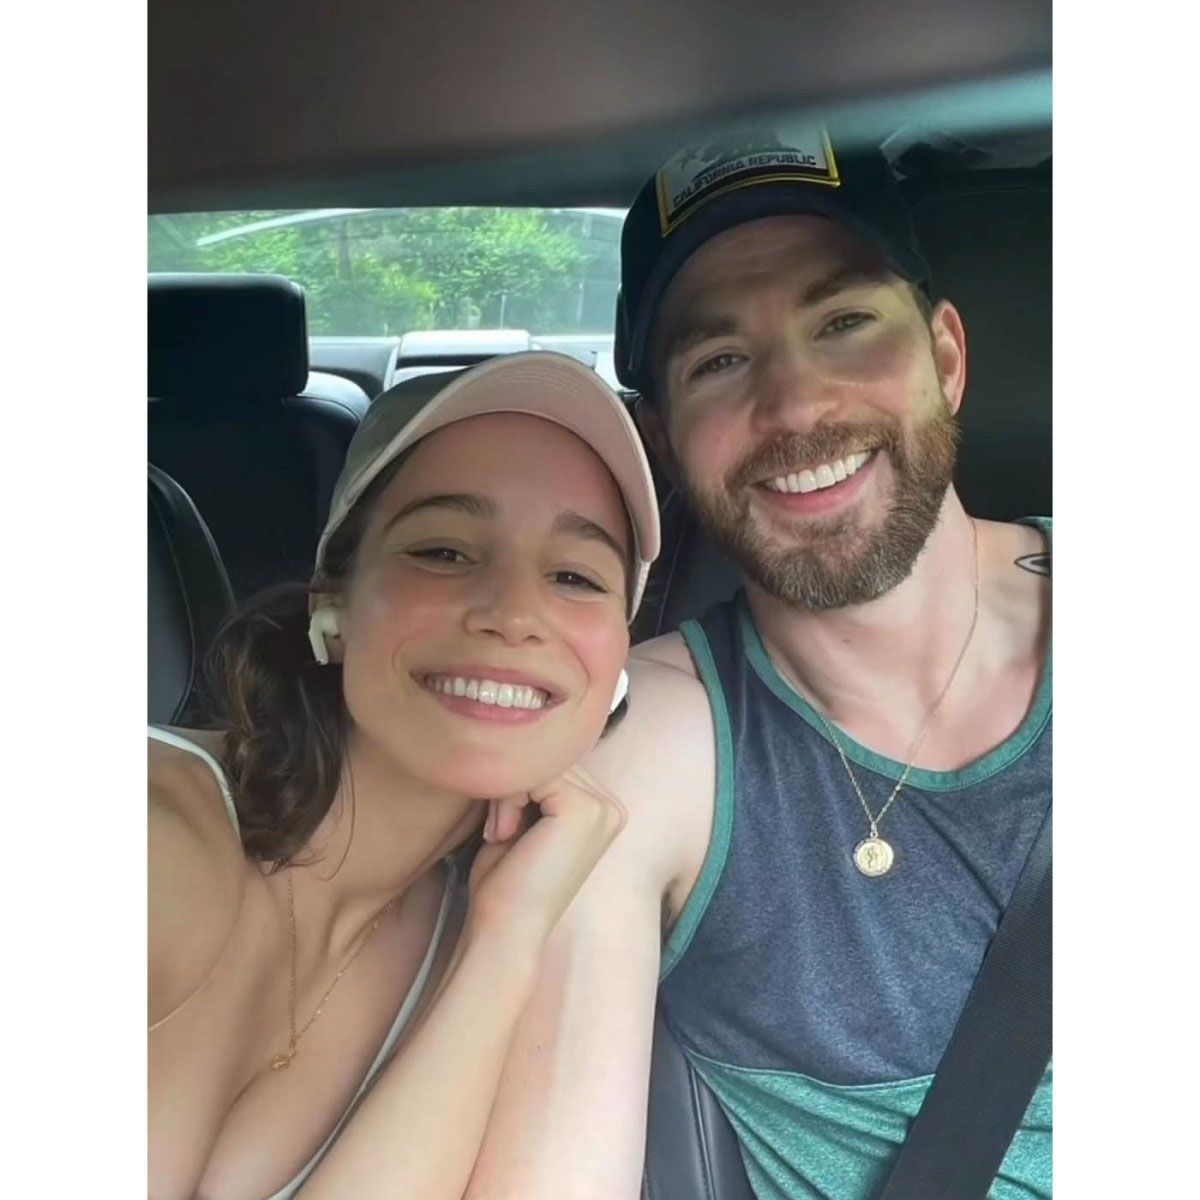 Chris Evans and Alba Baptista Are Married: Reports